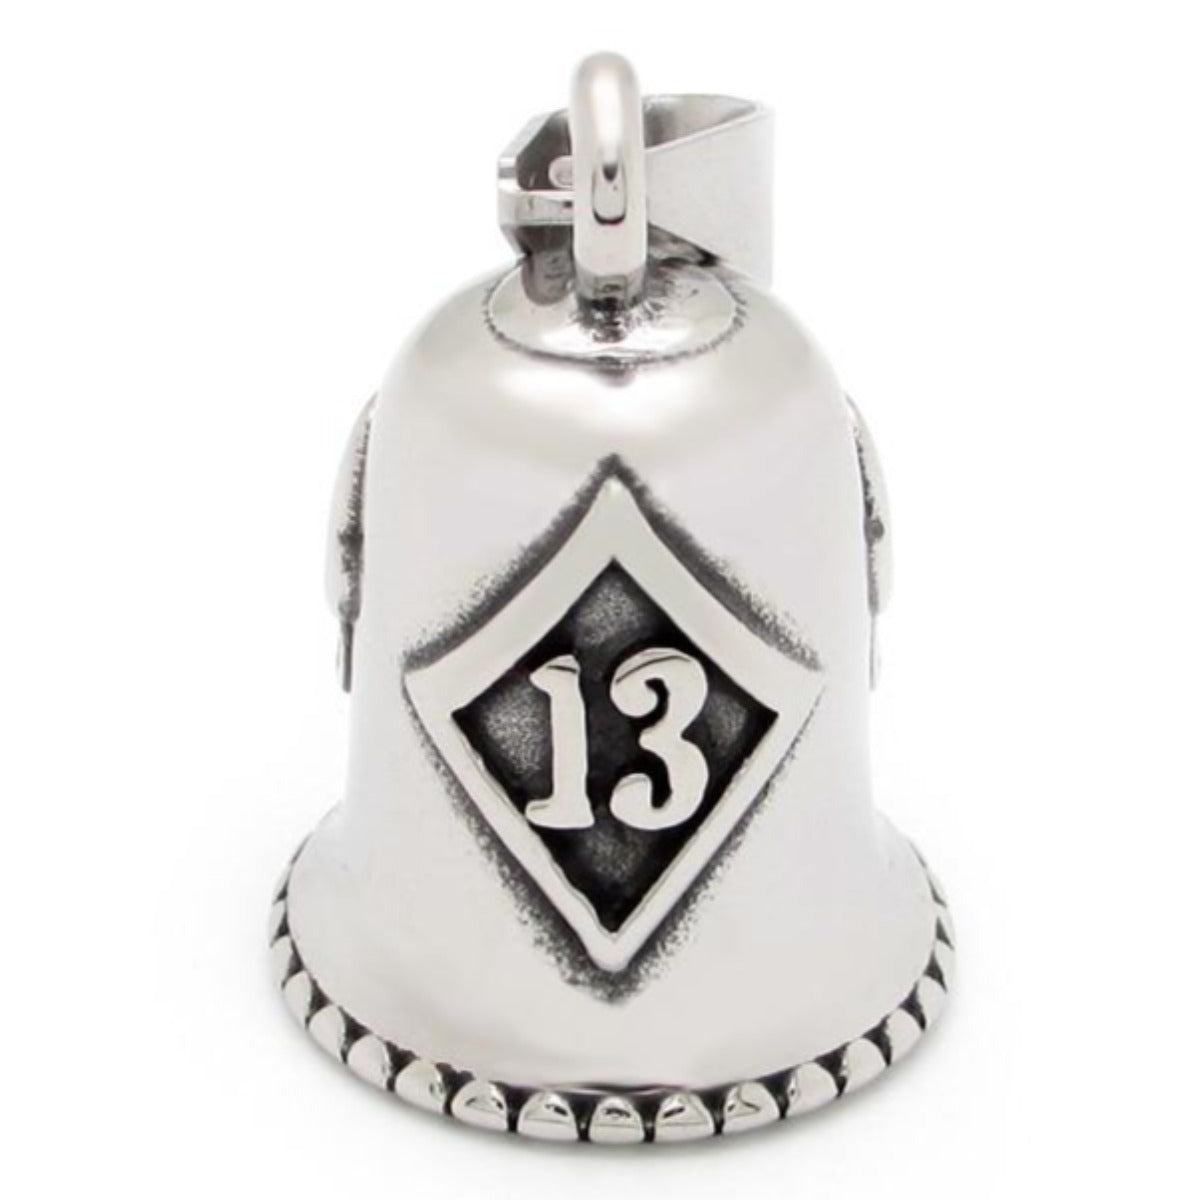 A stainless steel Lucky 13 Gremlin Bell with a lucky 13 design.